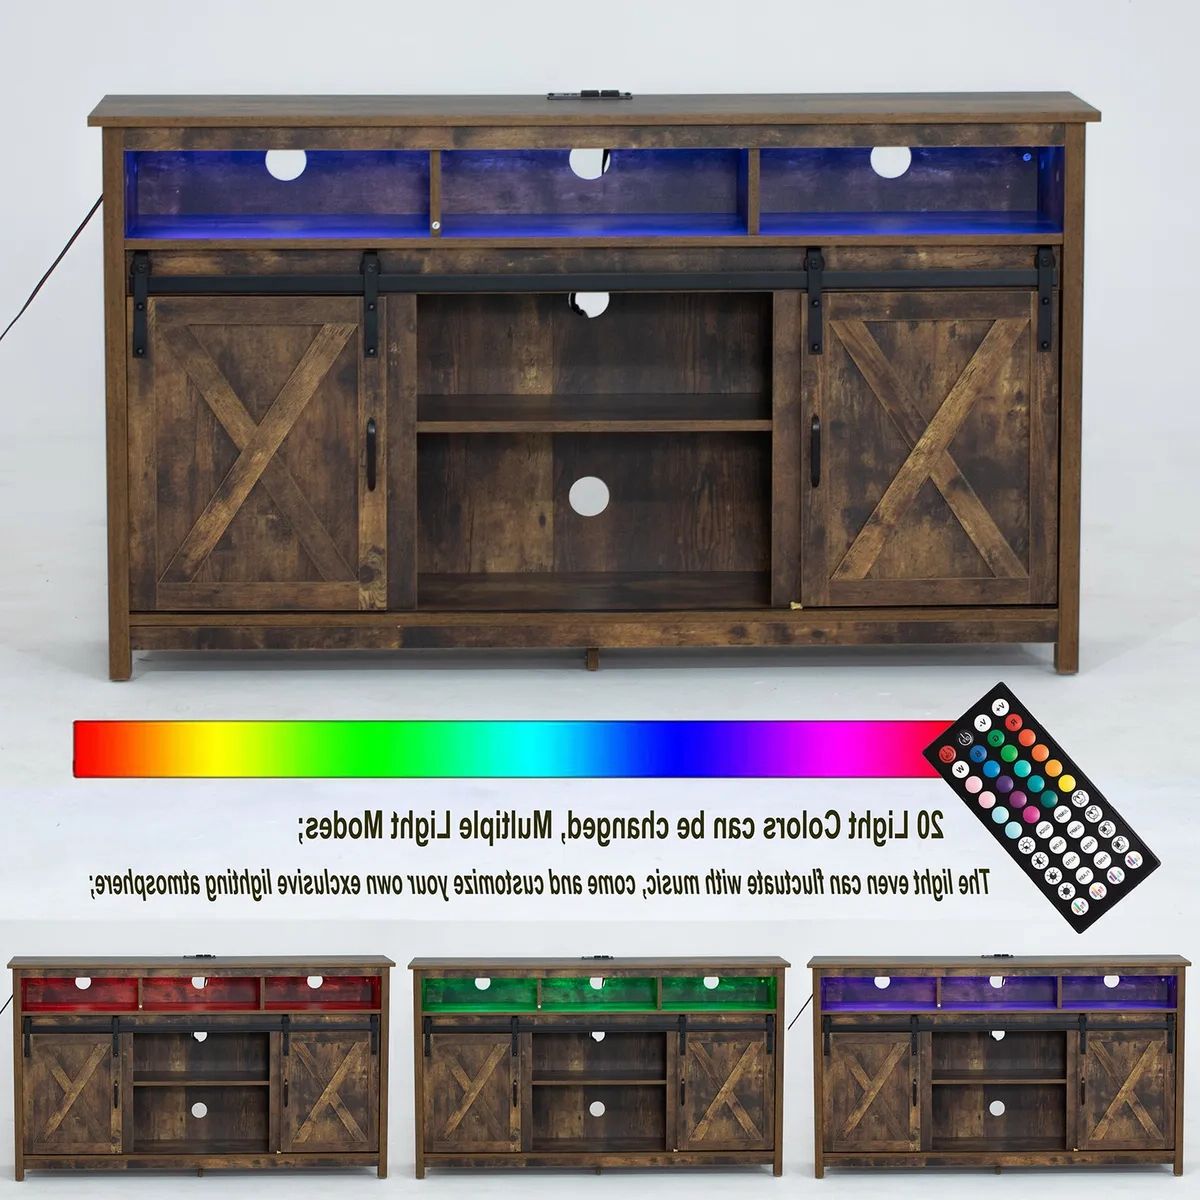 Farmhouse Led Coffee Bar Cabinet Barn Door Sideboard Buffet With Power  Outlet | Ebay For Sideboards With Power Outlet (View 4 of 20)